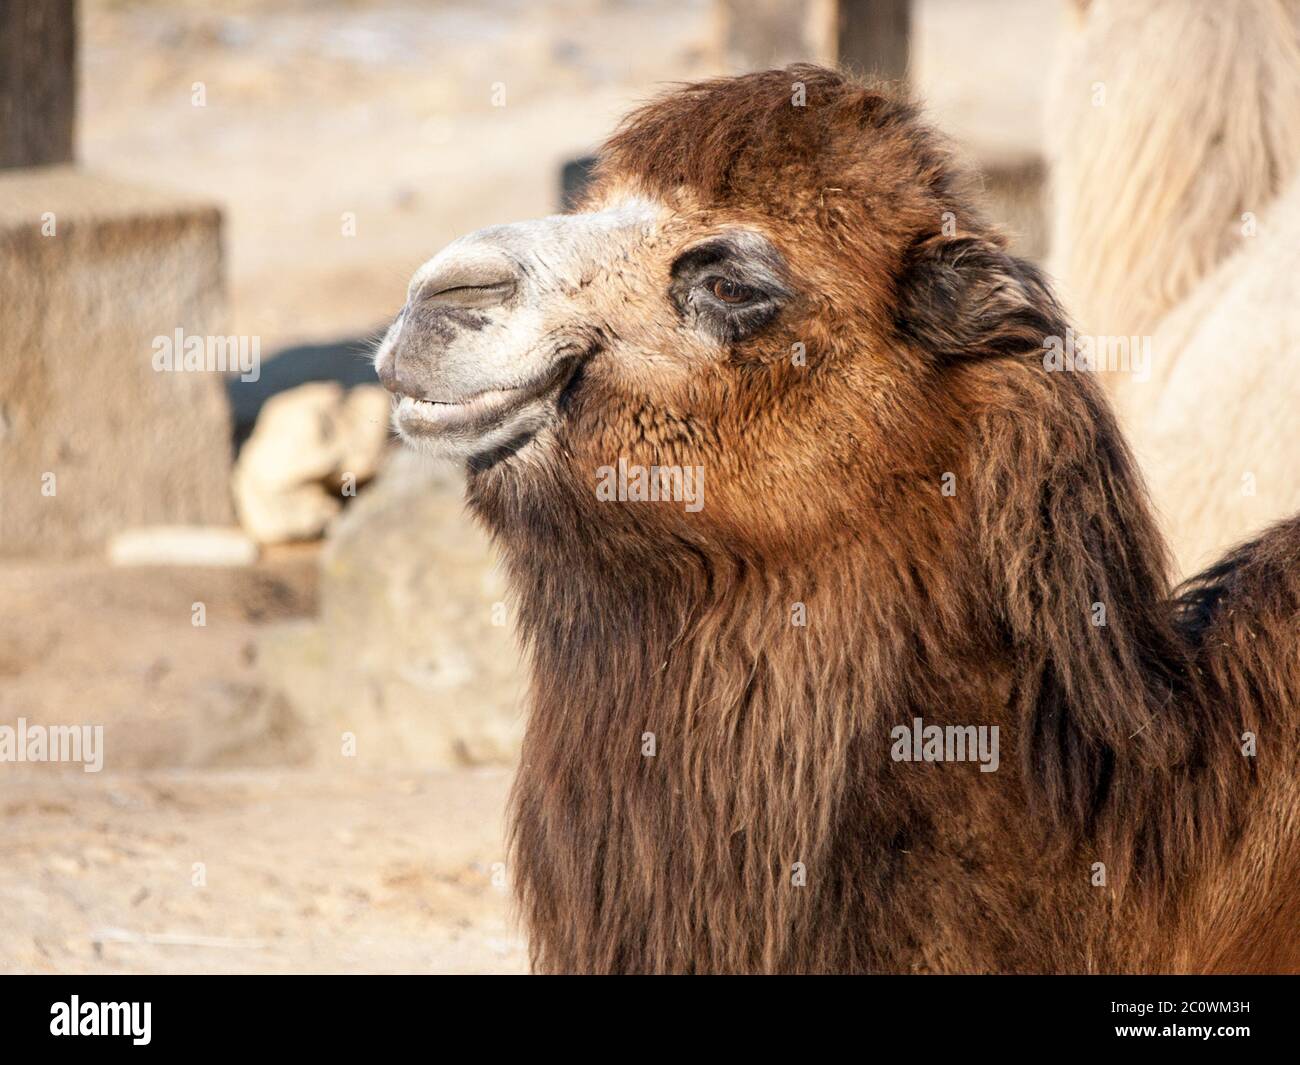 Close-up portrait of Domestic Bactrian Camel, Camelus bactrianus ferus, with long brown fur lying on the ground, native to the steppes of Central Asia Stock Photo